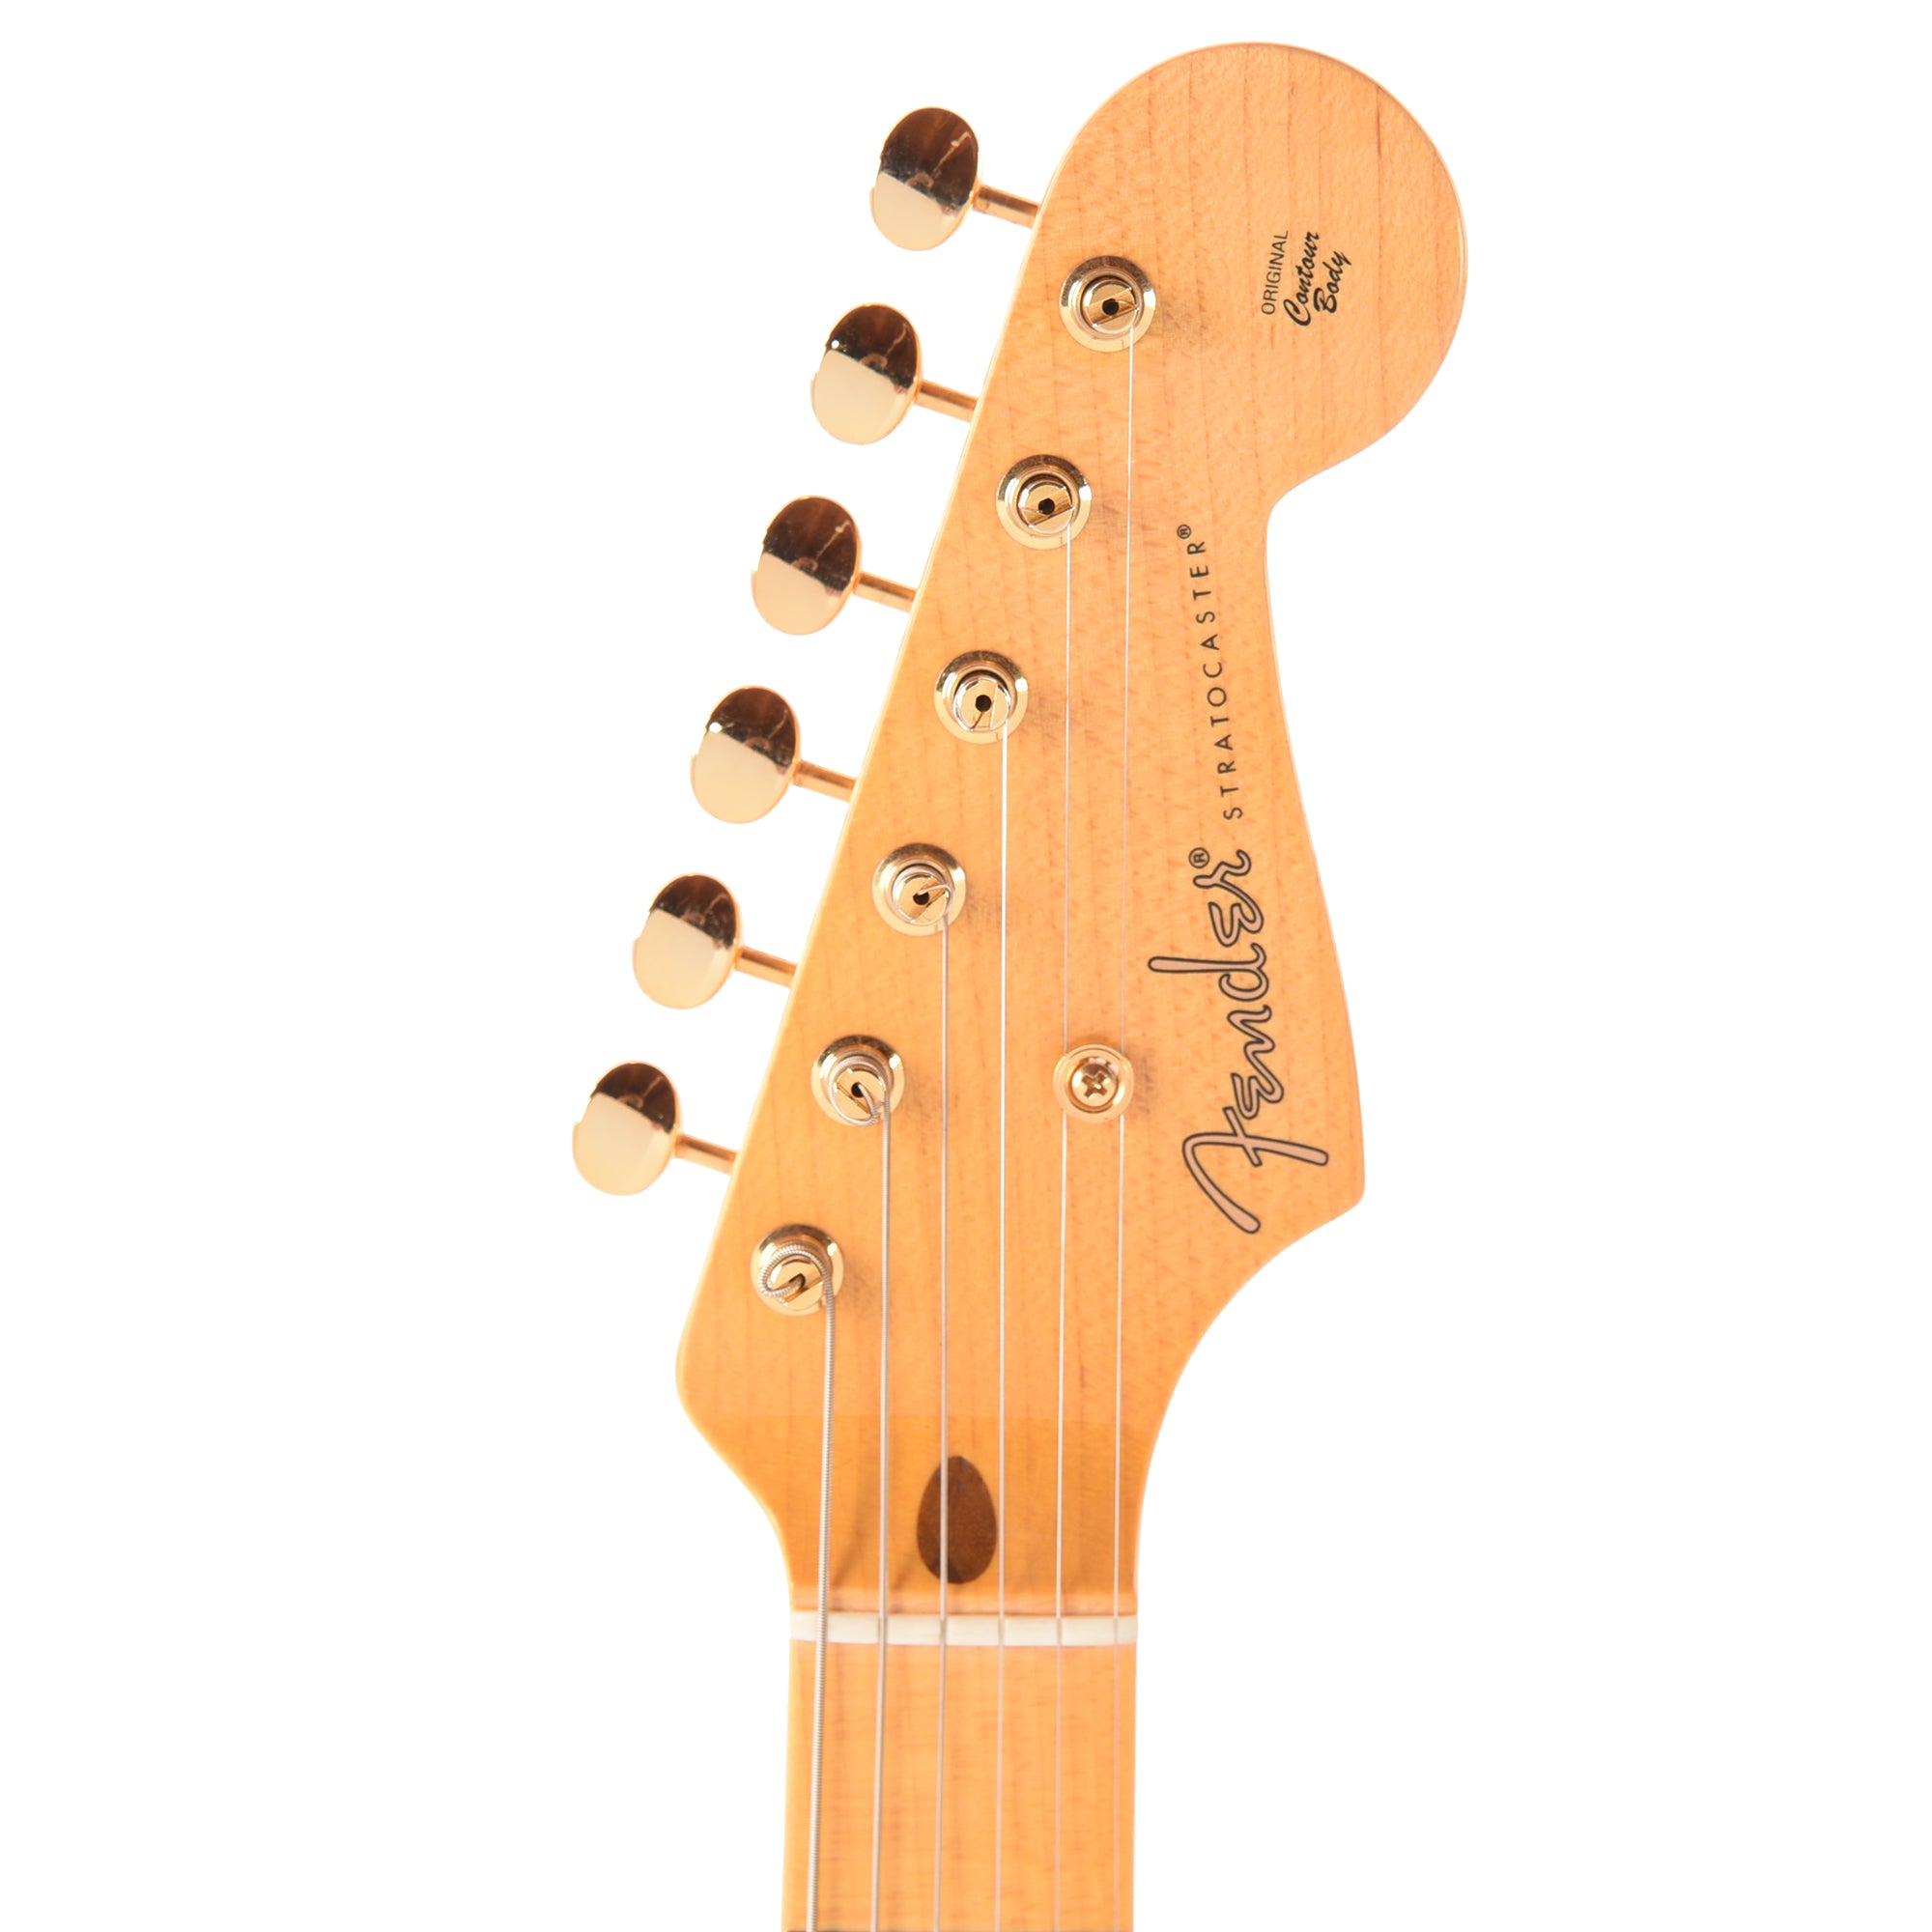 Fender Custom Shop Limited Edition '54 Hardtail Stratocaster Deluxe Closet Classic with Gold Hardware Faded Aged Canary Yellow